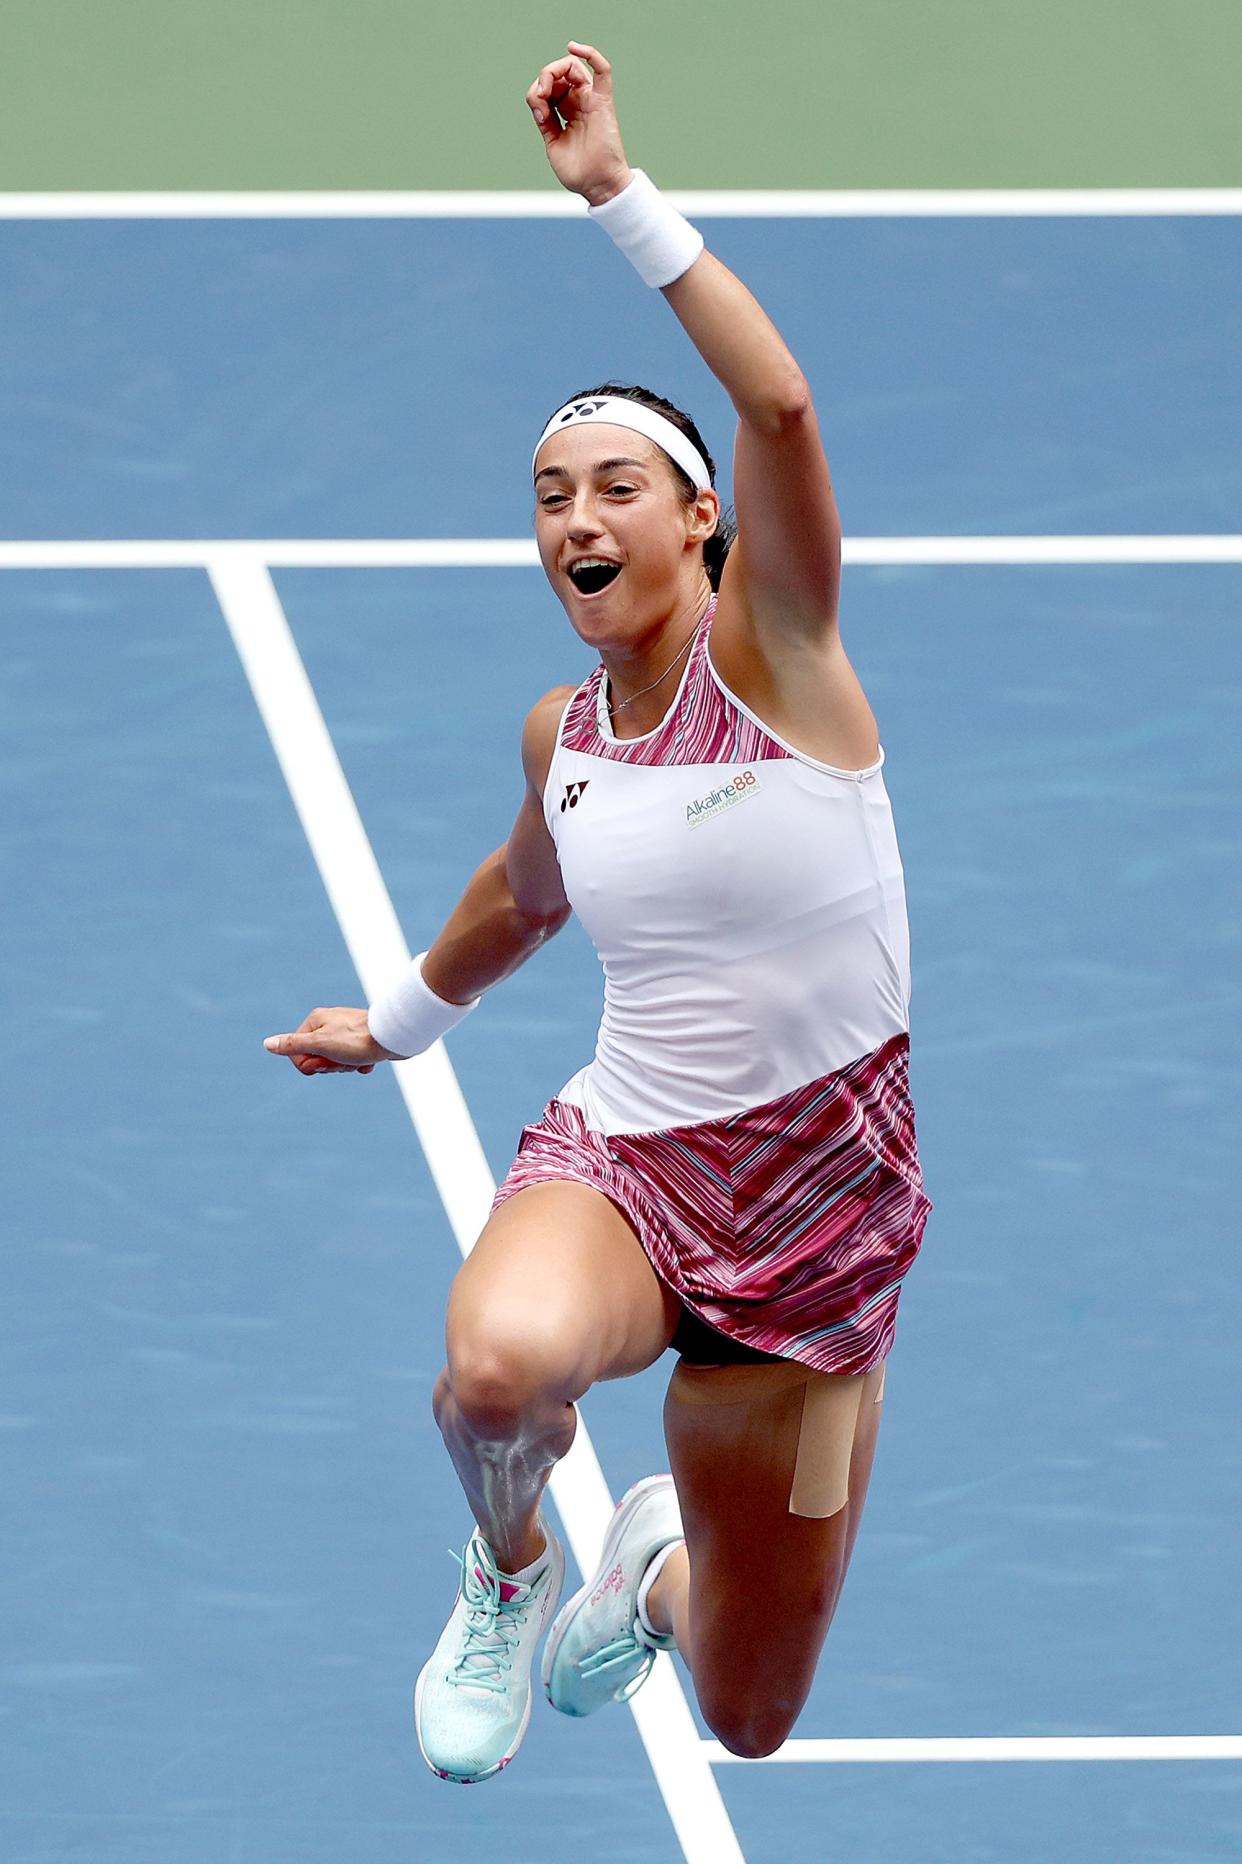 Caroline Garcia of France celebrates match point against Alison Riske-Amritraj of the United States during their Women's Singles Fourth Round match on Day Seven of the 2022 U.S. Open at USTA Billie Jean King National Tennis Center on Sept. 4, 2022, in Flushing, Queens.